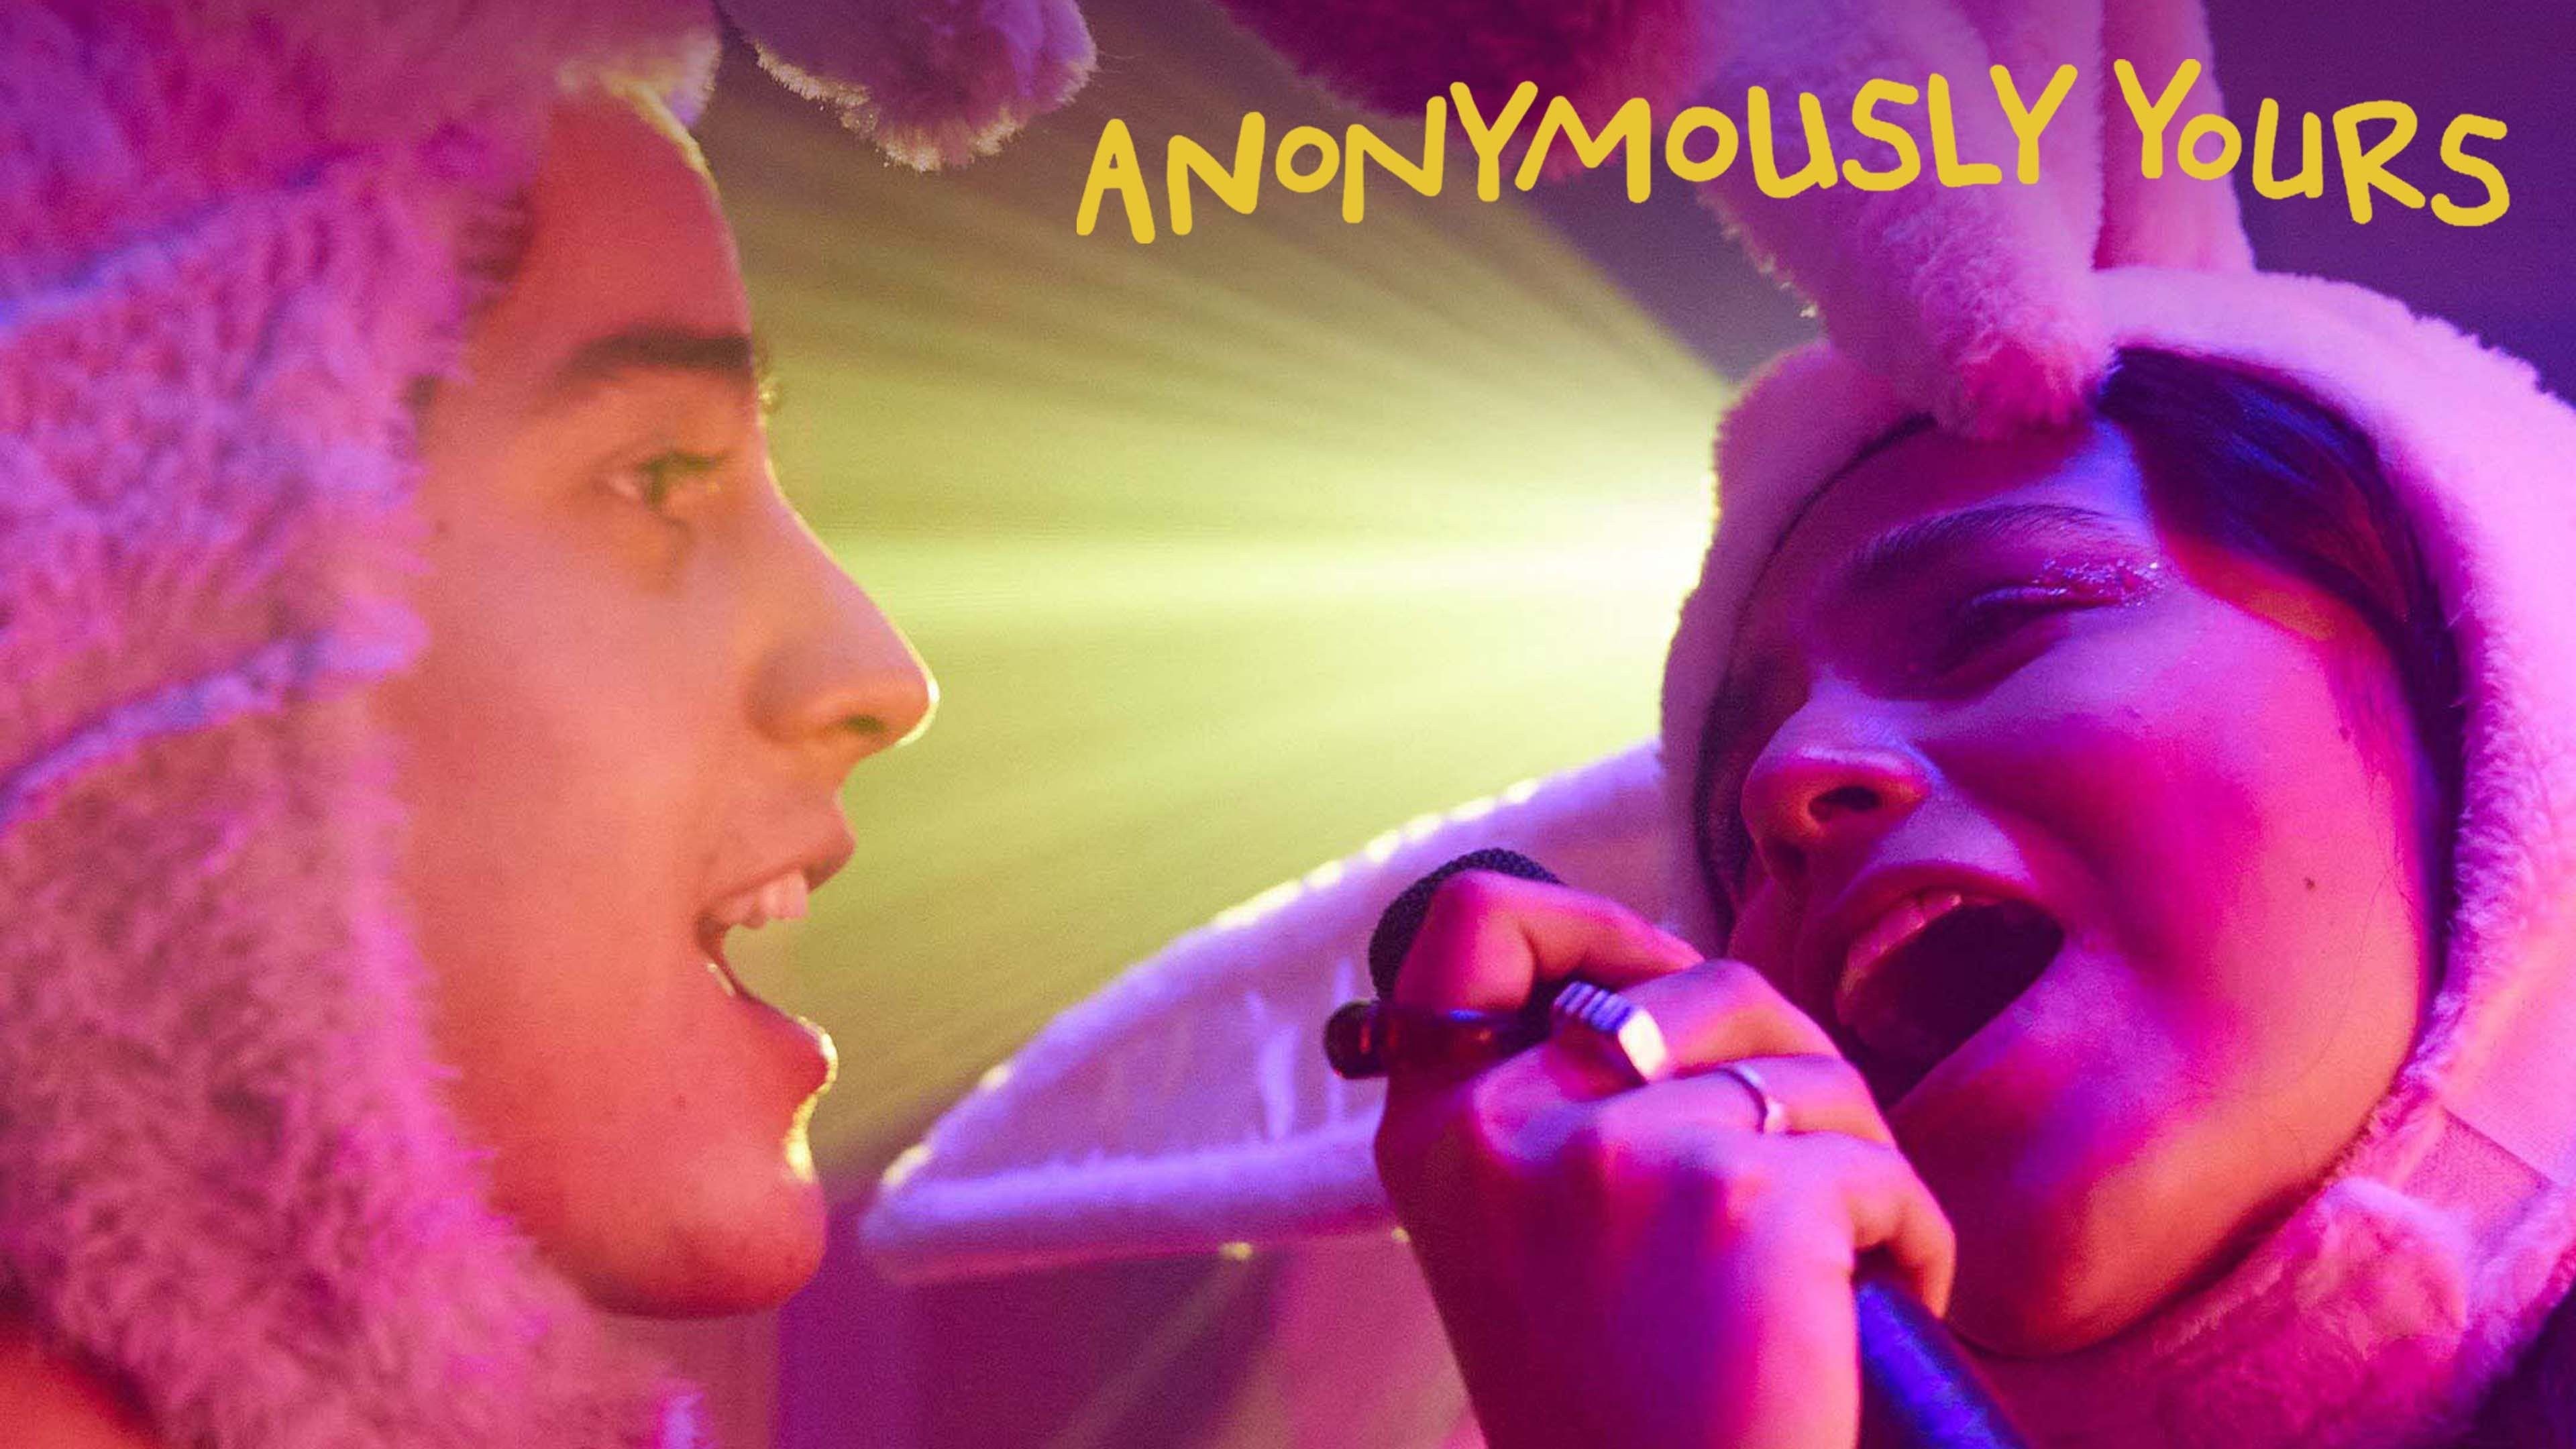 Anonymously Yours Soundtrack: Every Song in the Netflix Movie